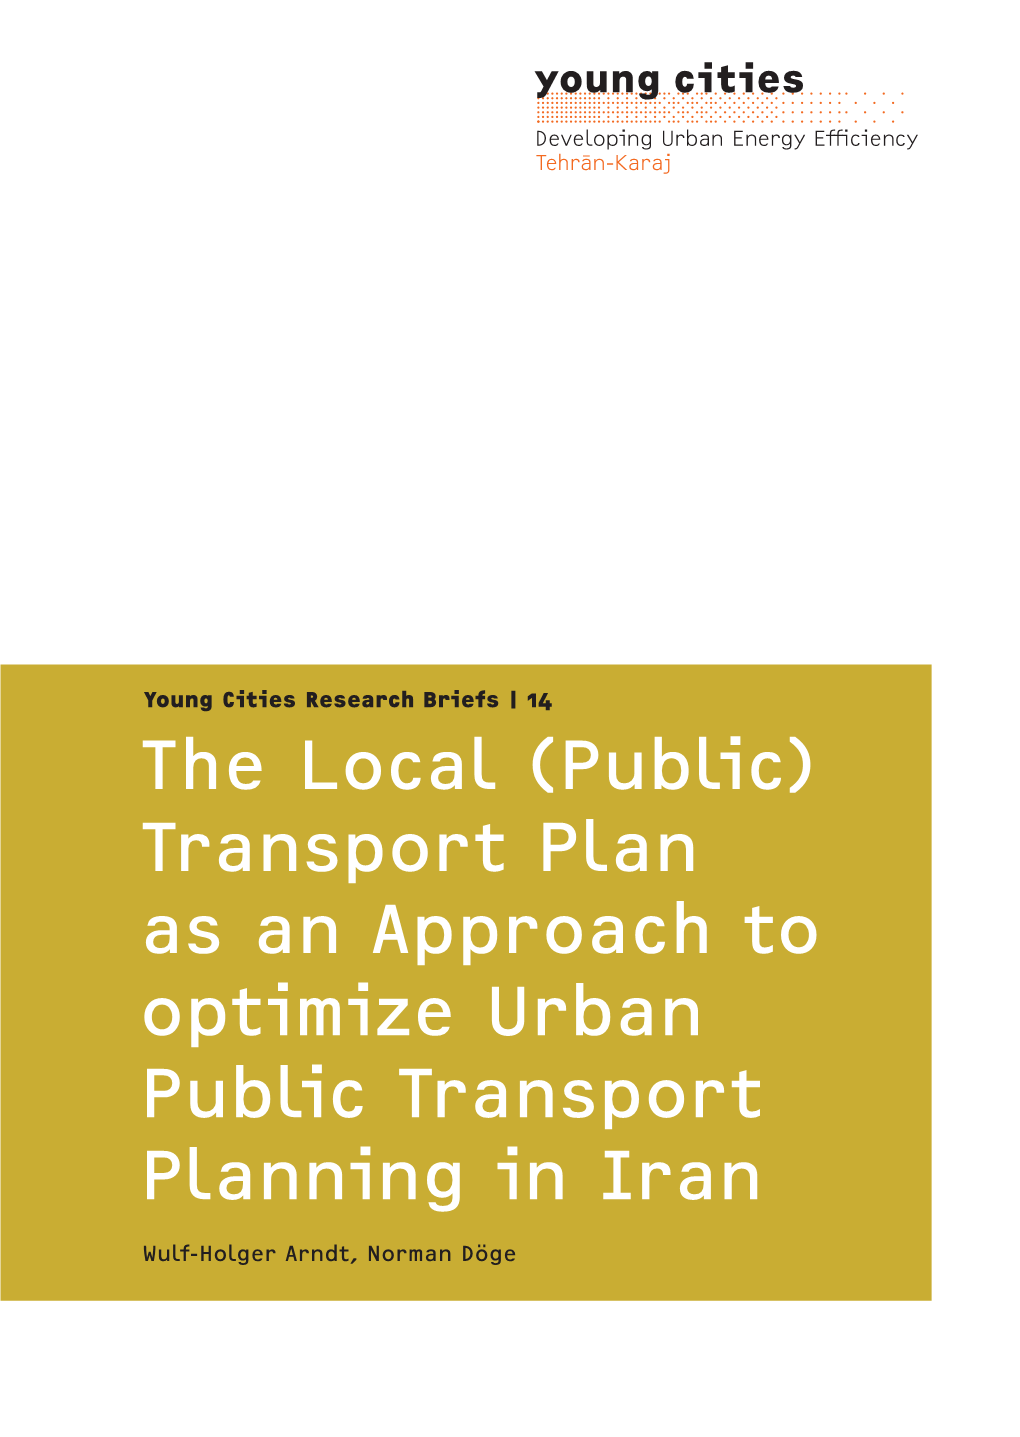 (Public) Transport Plan As an Approach to Optimize Urban Public Transport Planning in Iran